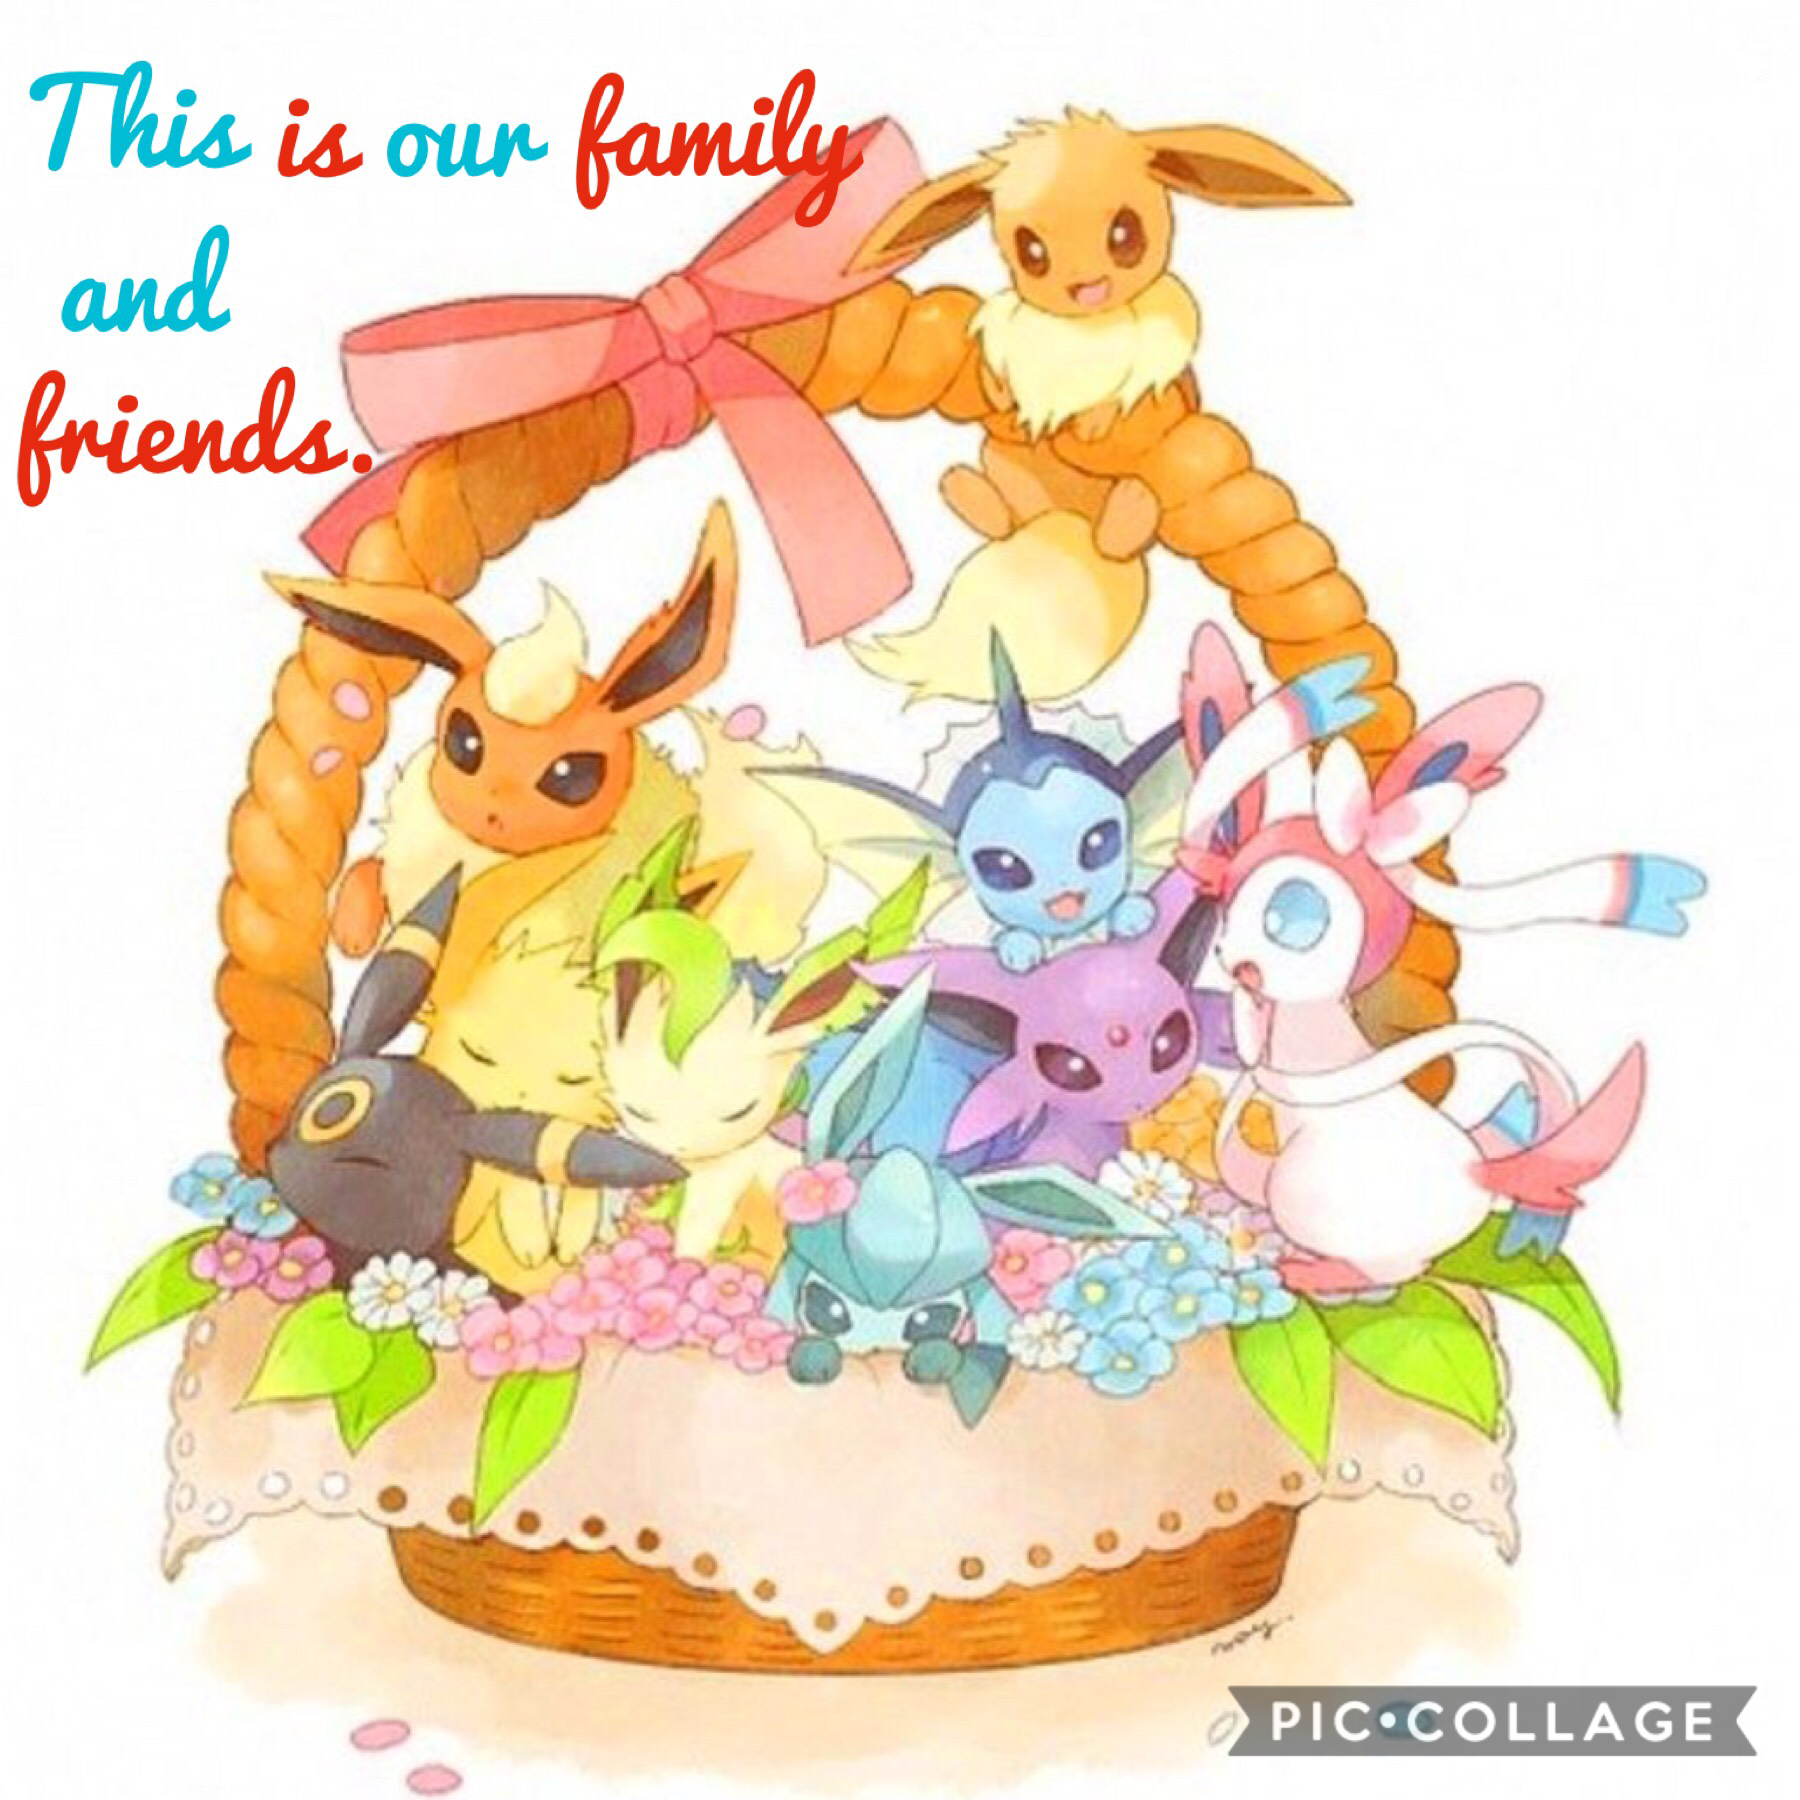 This is our family and friends 